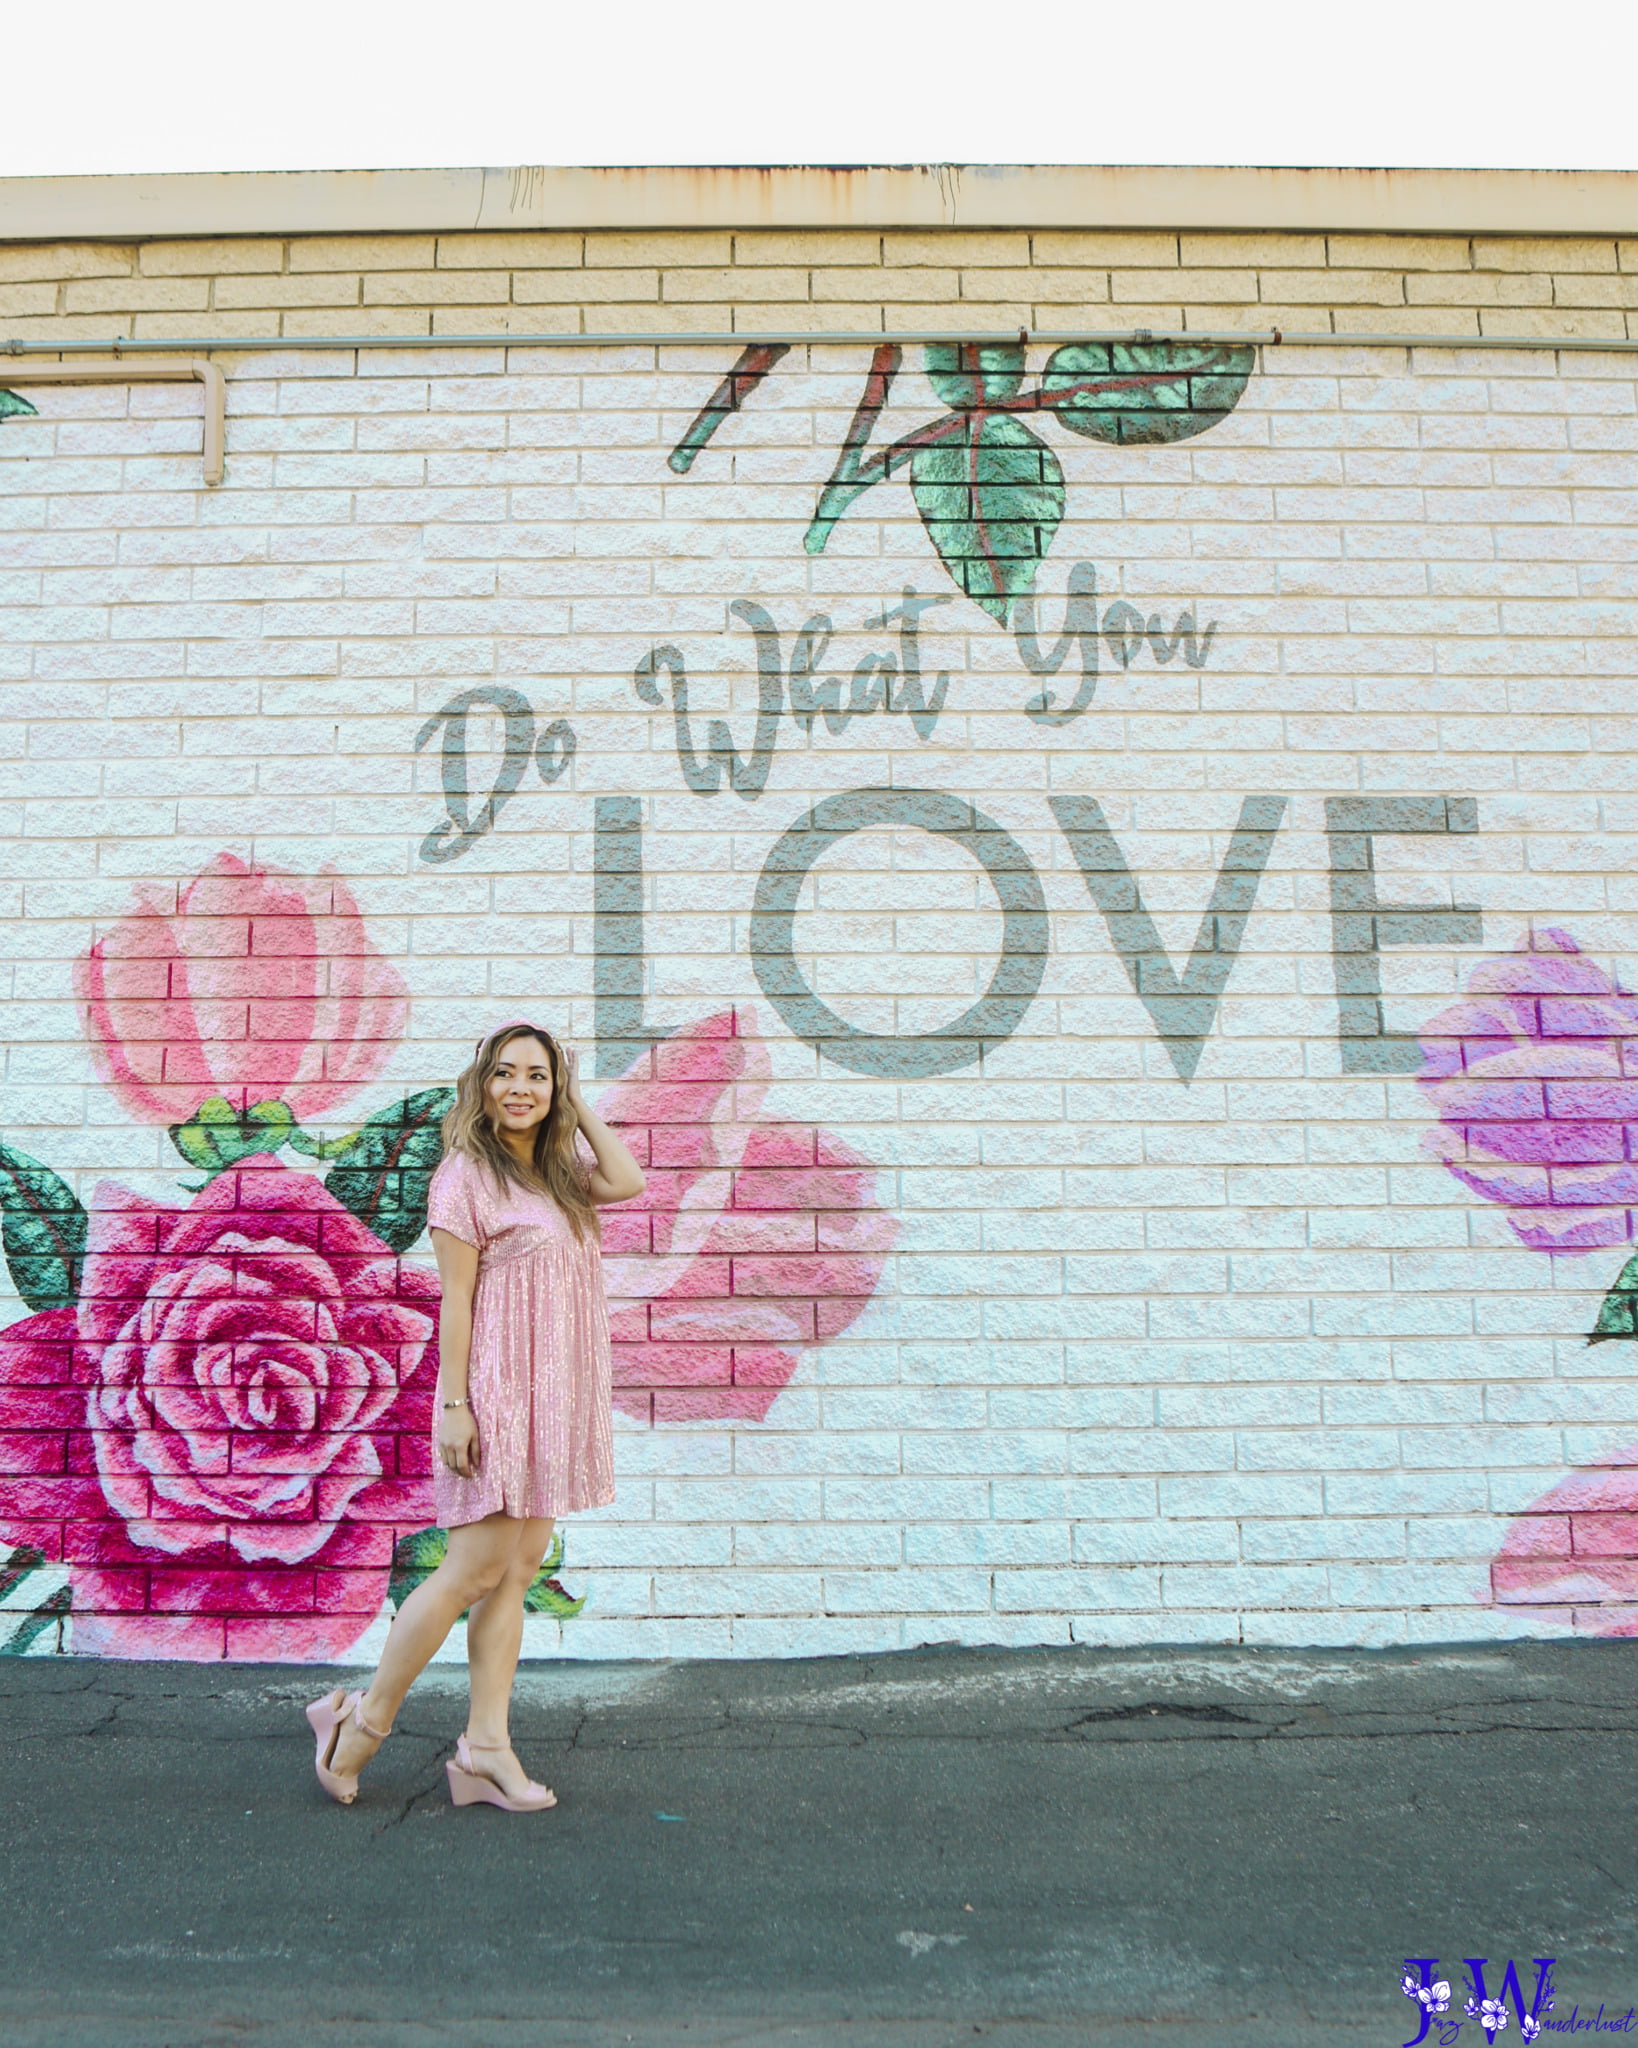 Do What You love mural at Dots Cafe in Pasadena. Photography by Jaz Wanderlust.